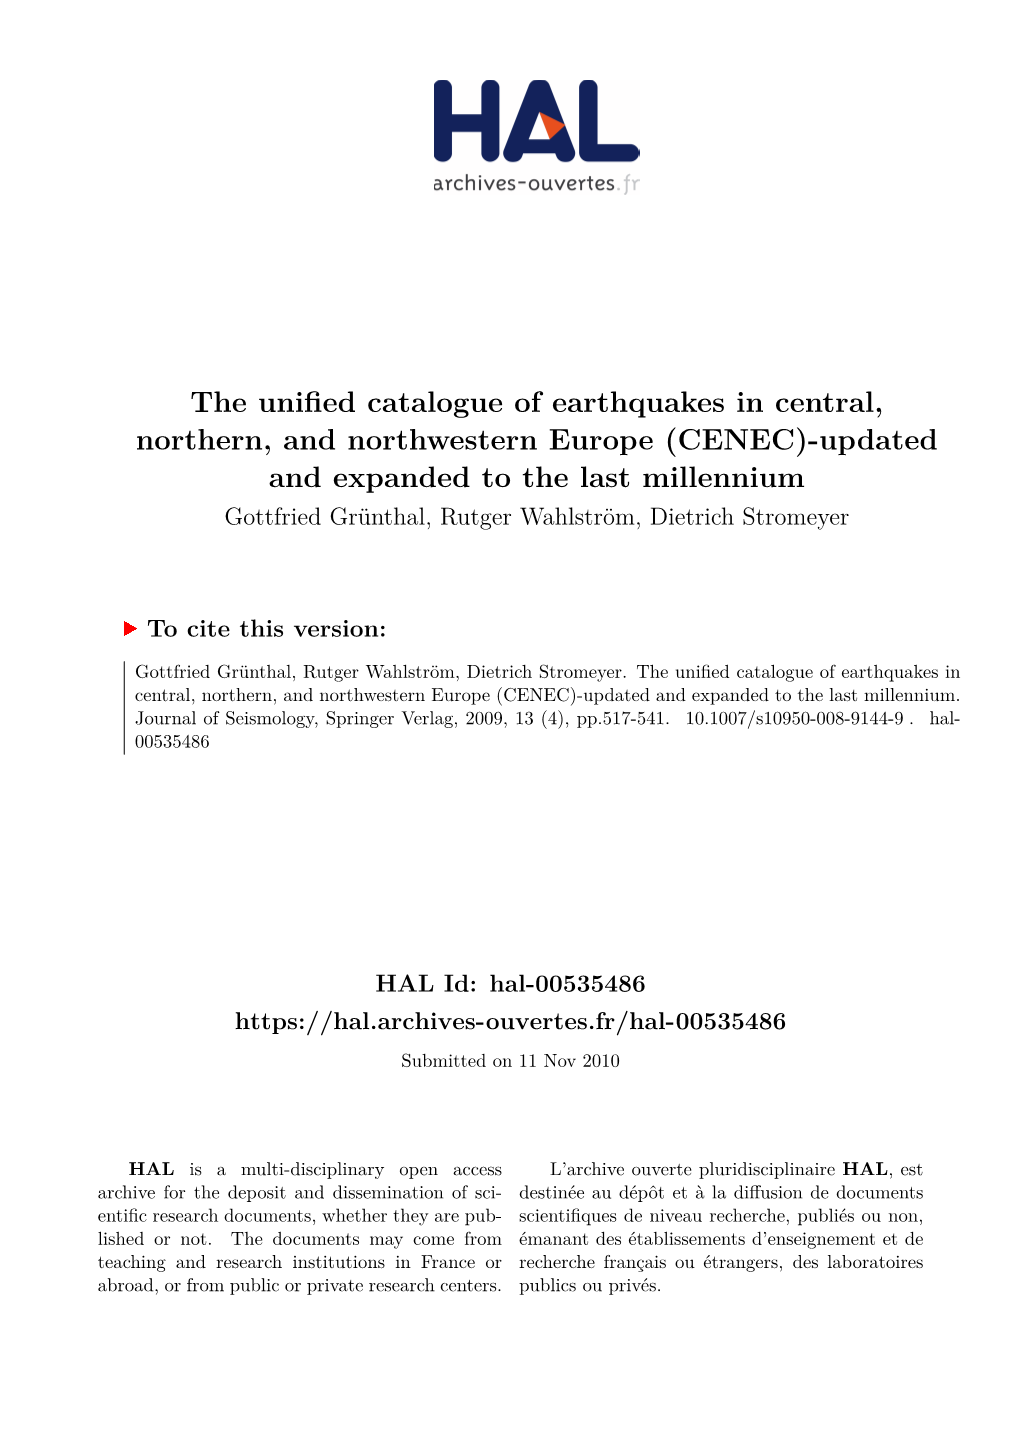 The Unified Catalogue of Earthquakes in Central, Northern, And